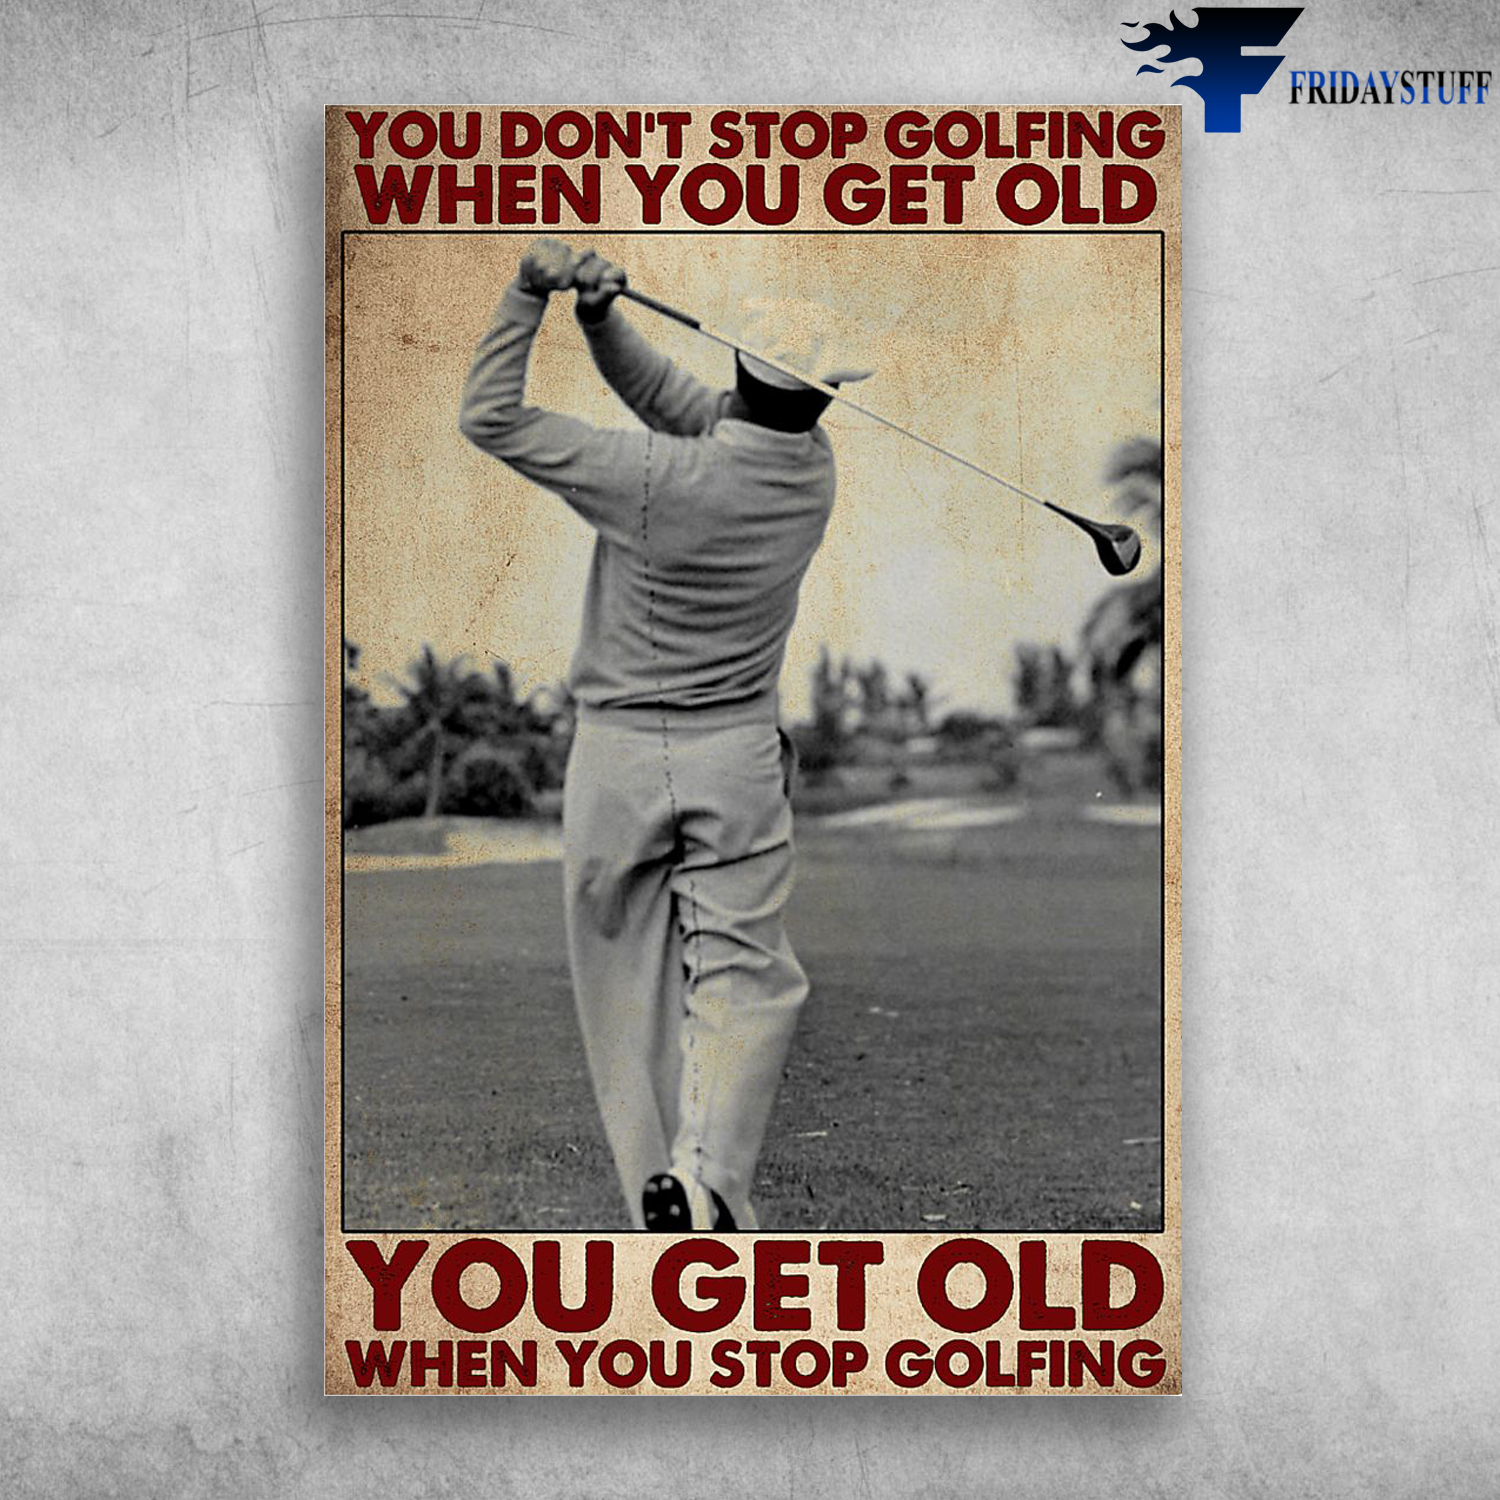 Man Playing Golf - You Don't Stop Golfing When You Get Old, You Get Old When You Stop Golfing